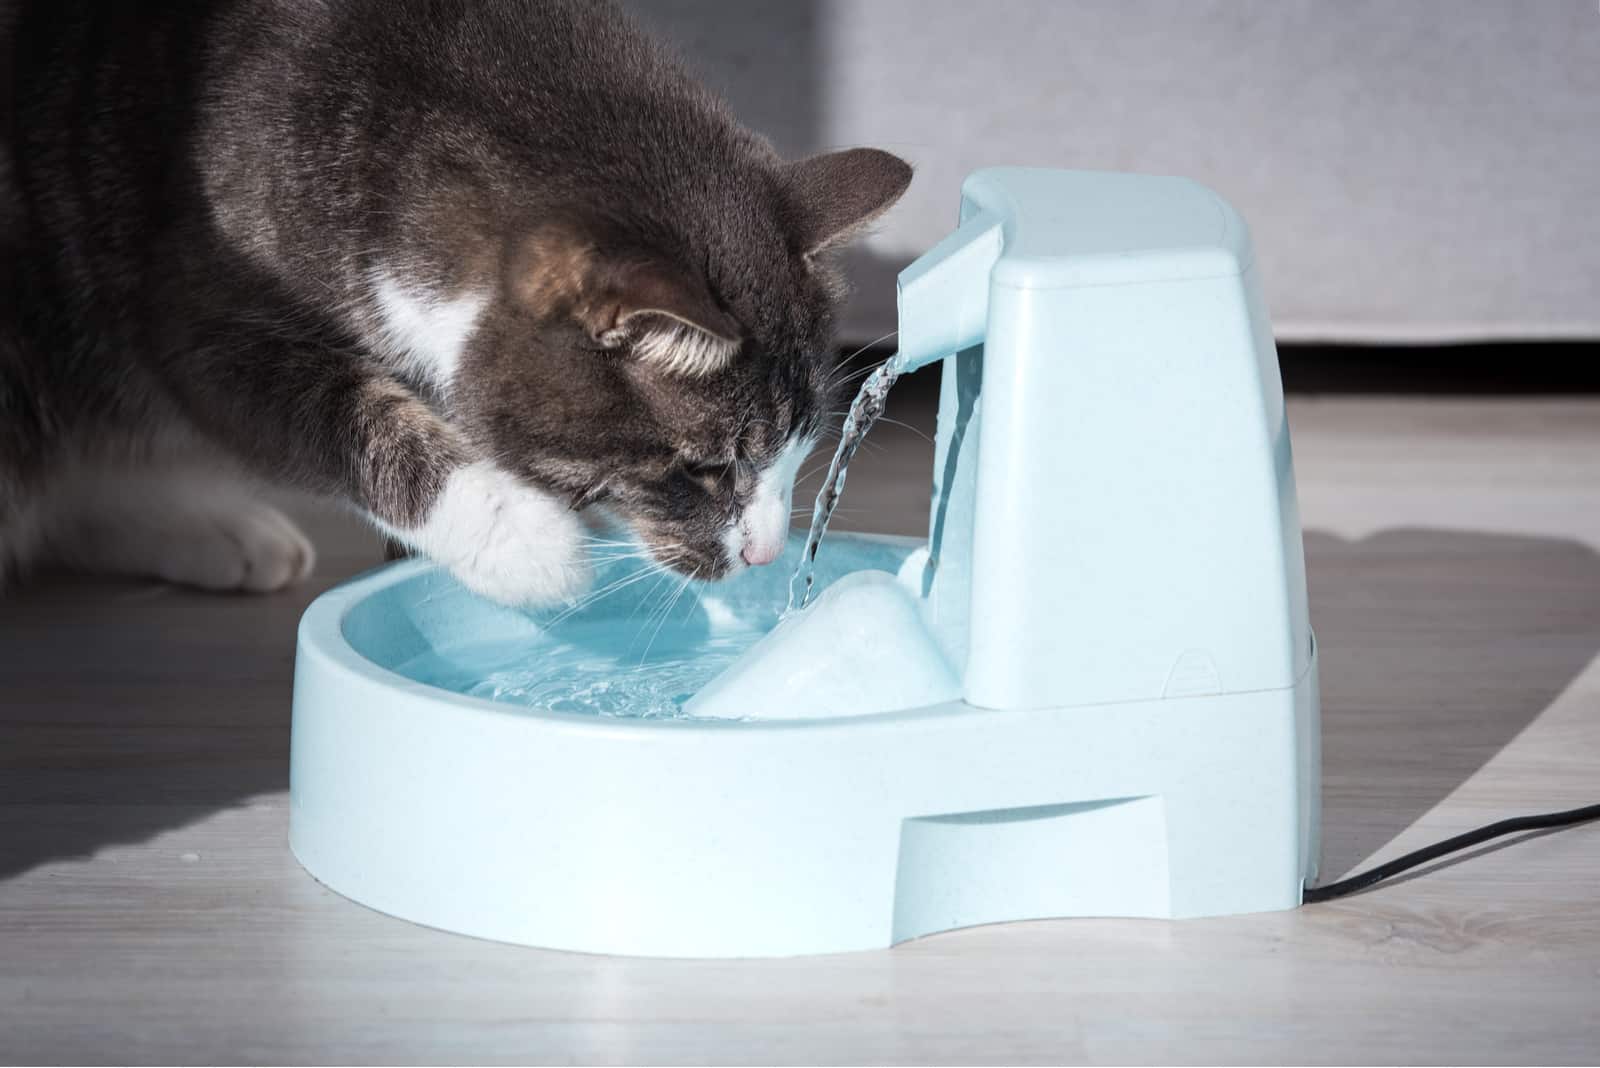 the cat drinks water from its vessel